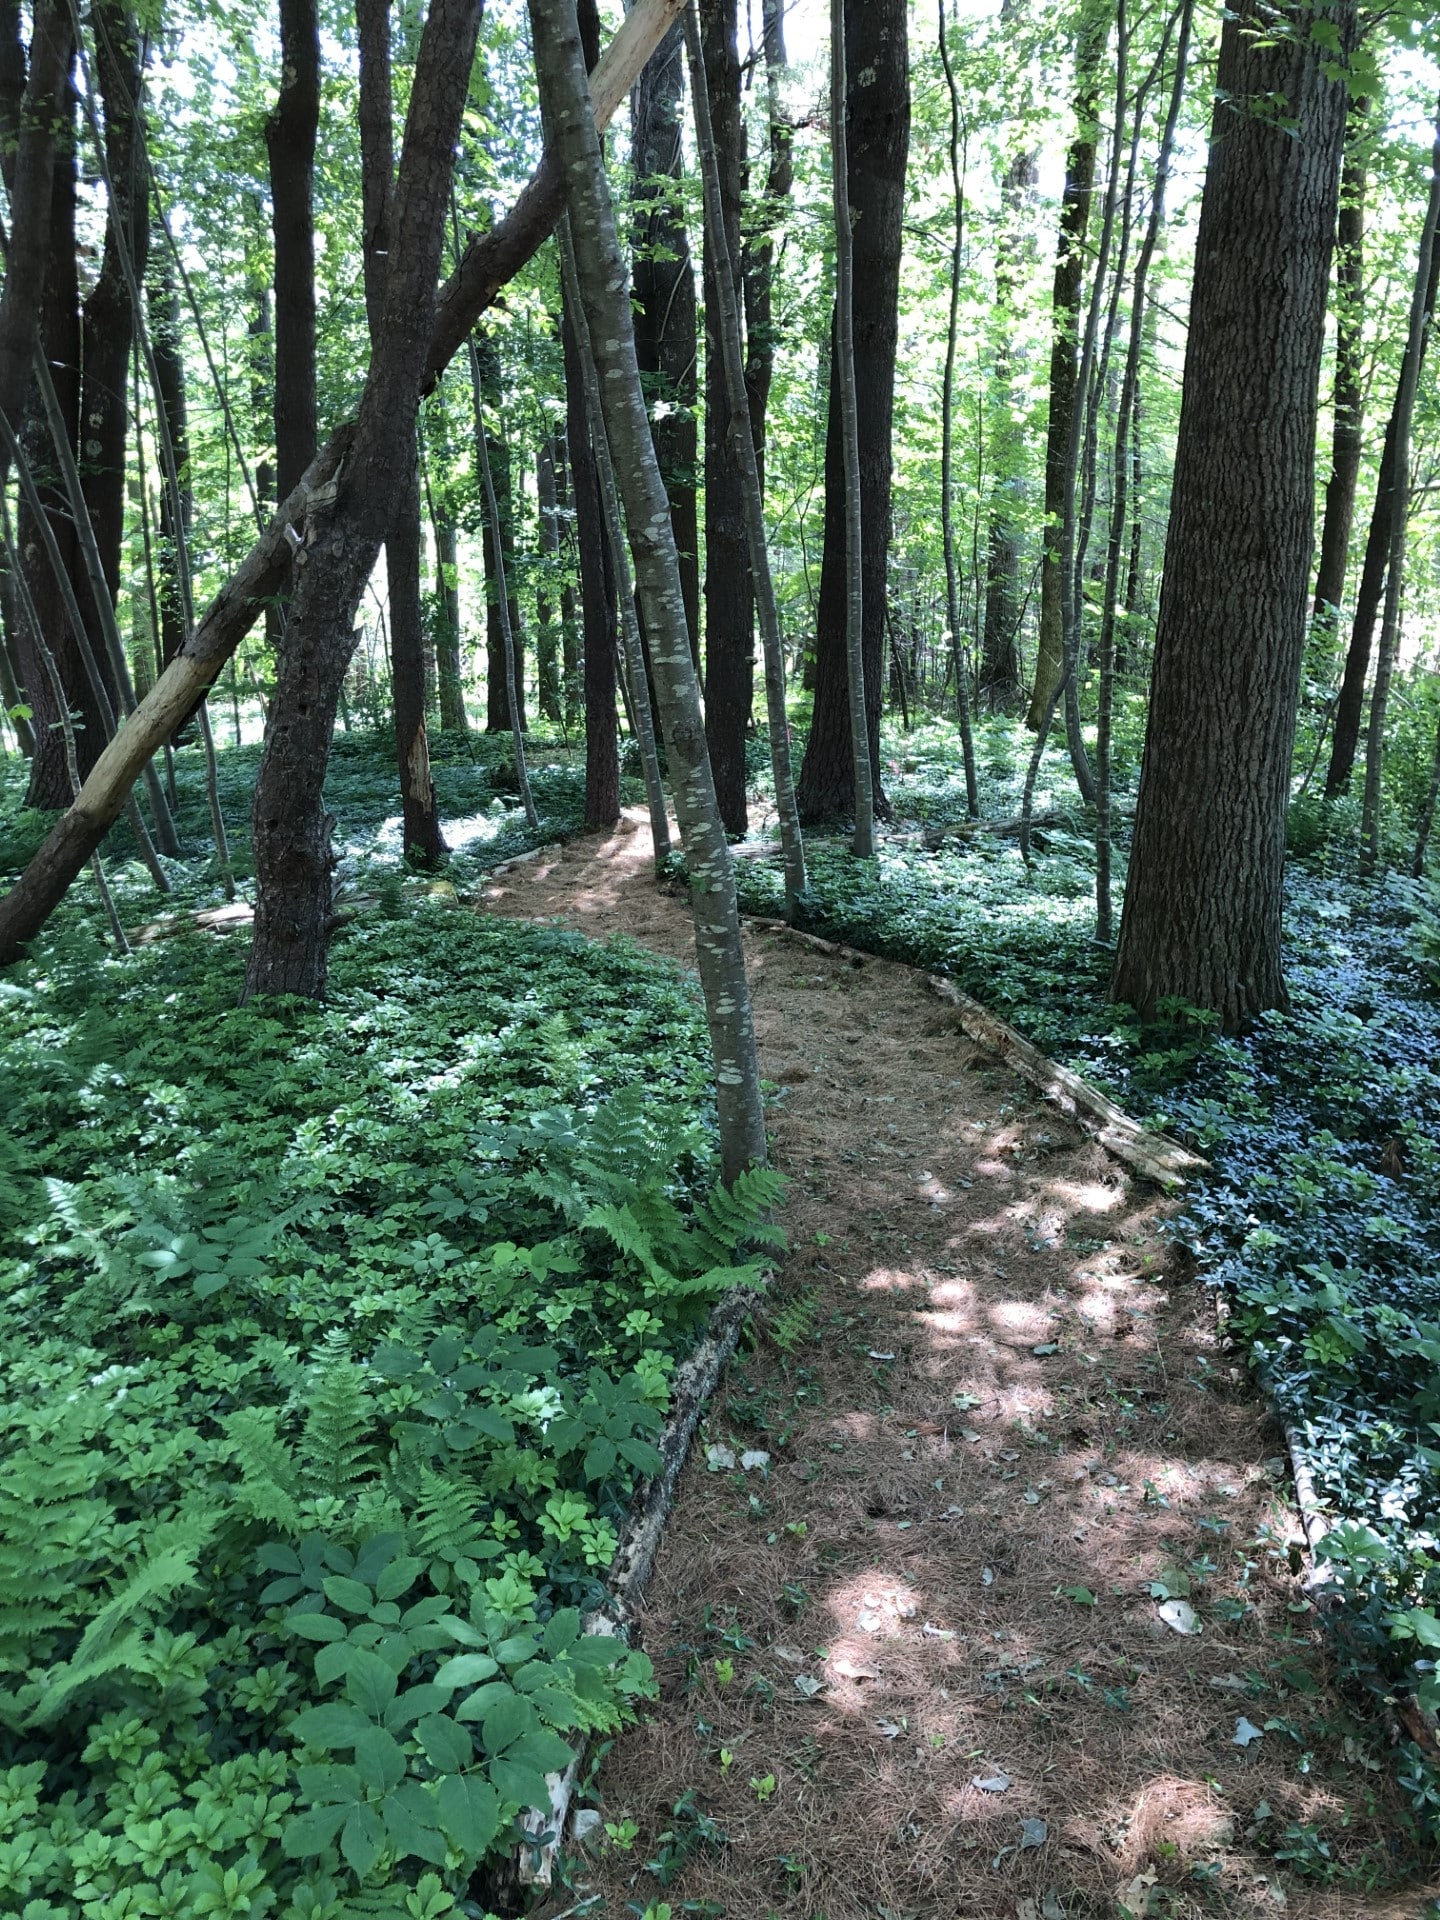 Enjoy the walking trail through the forest around the perimeter of the property.